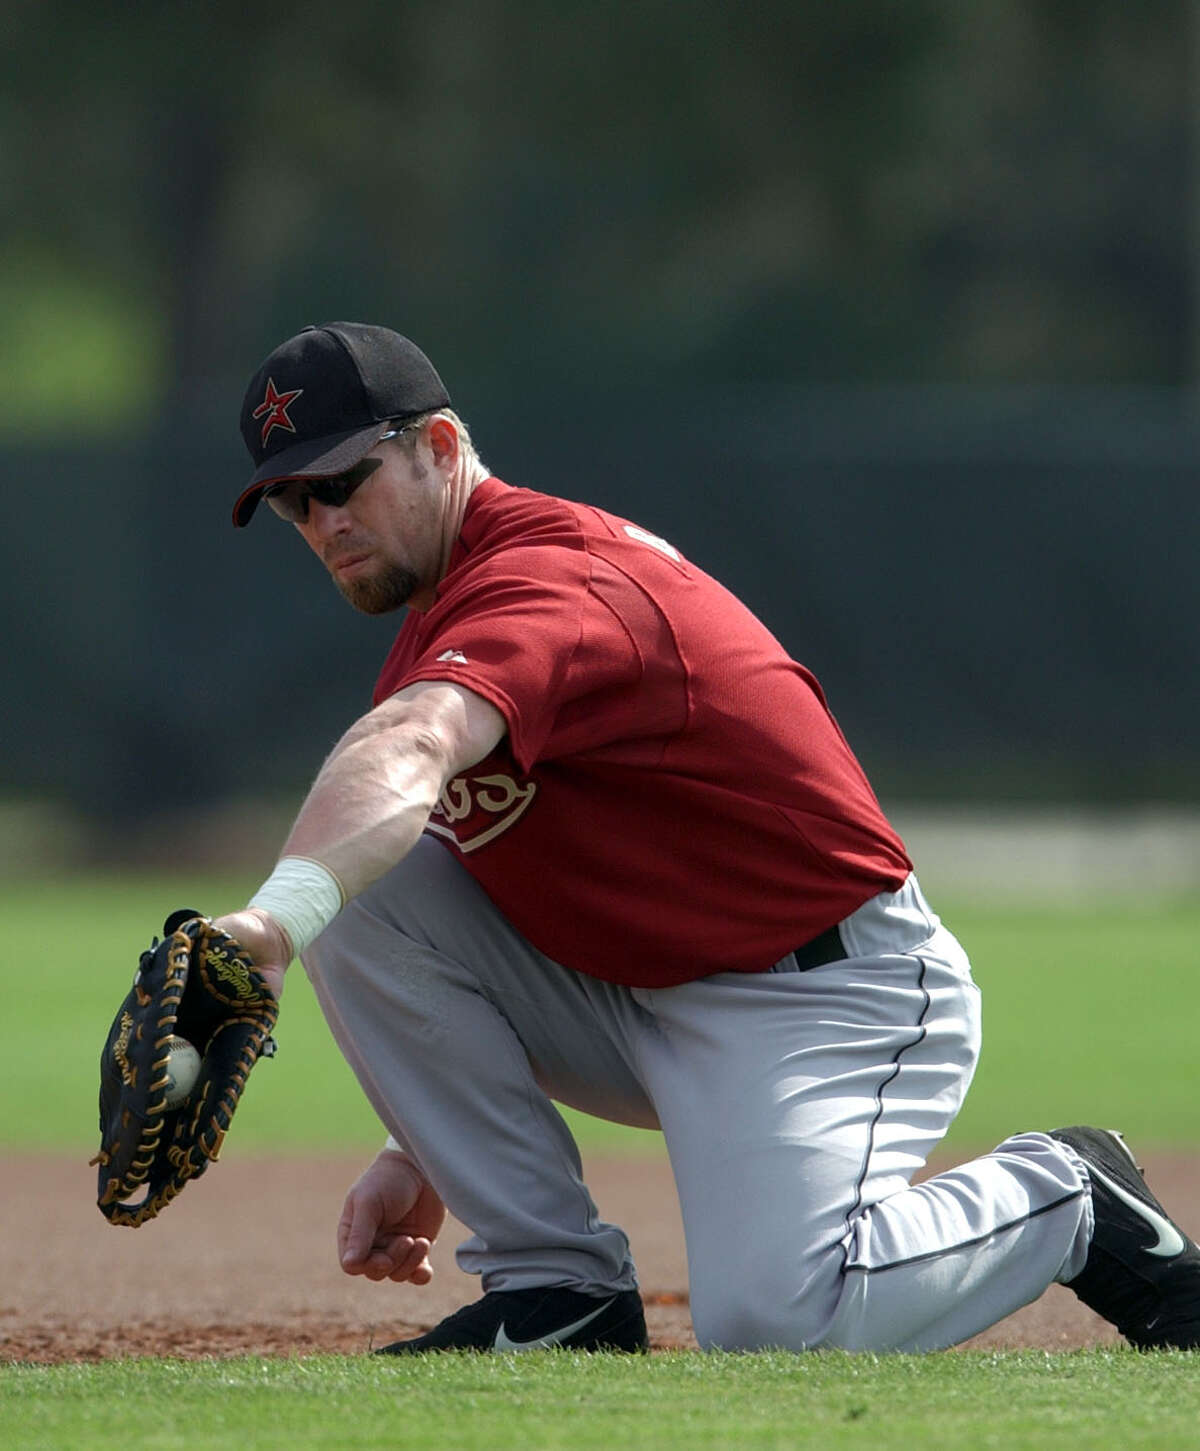 Though he wasn't a shortstop, Jeff Bagwell took a tip from Hall of Famer Ozzie Smith and improved his backhand.